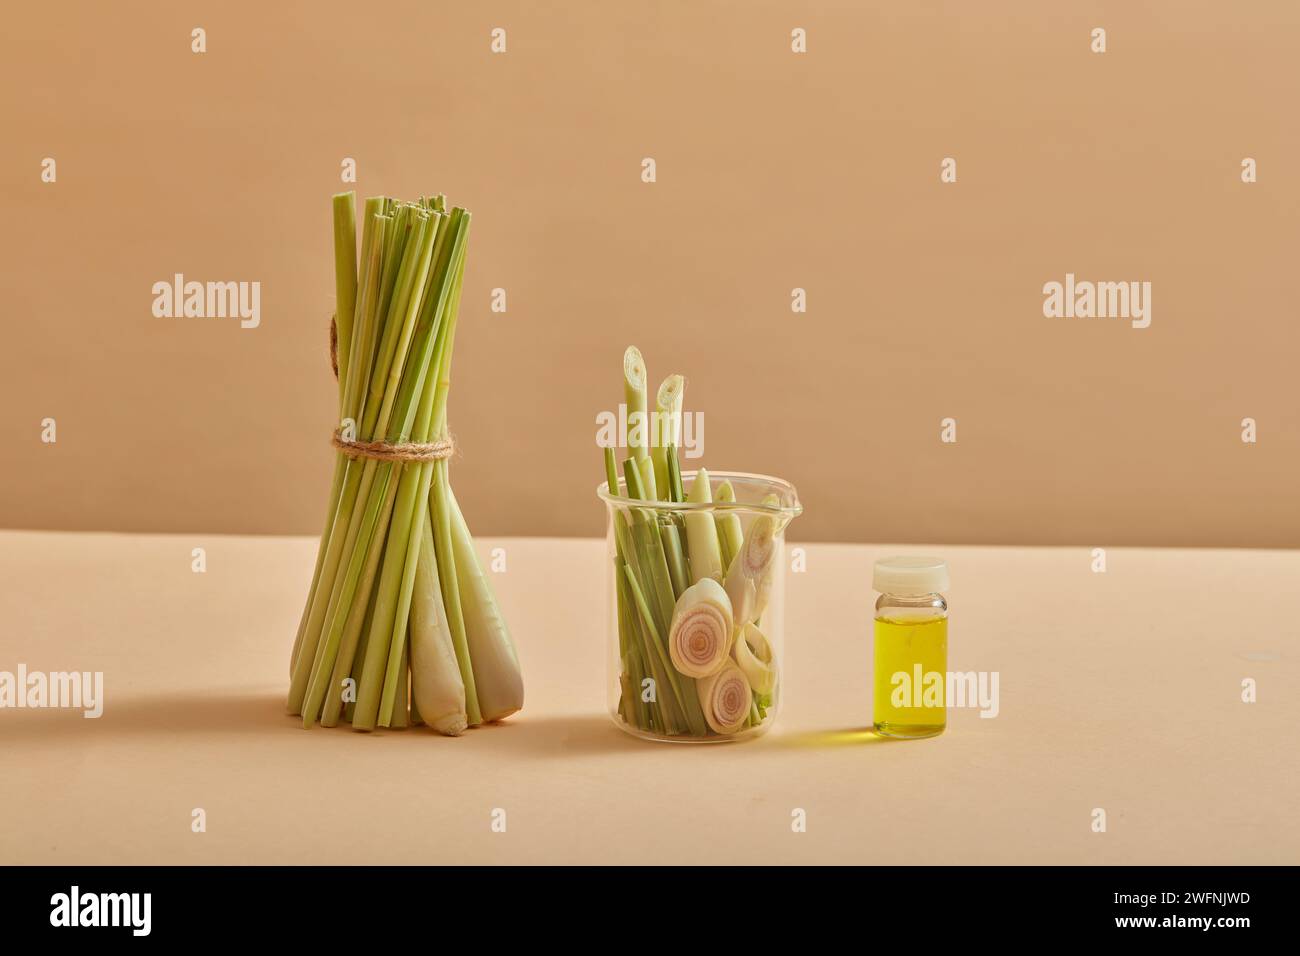 A bunch of lemongrass standing next to a glass jar of lemongrass. An empty label bottle containing essential oil extracted from lemongrass. Product mo Stock Photo